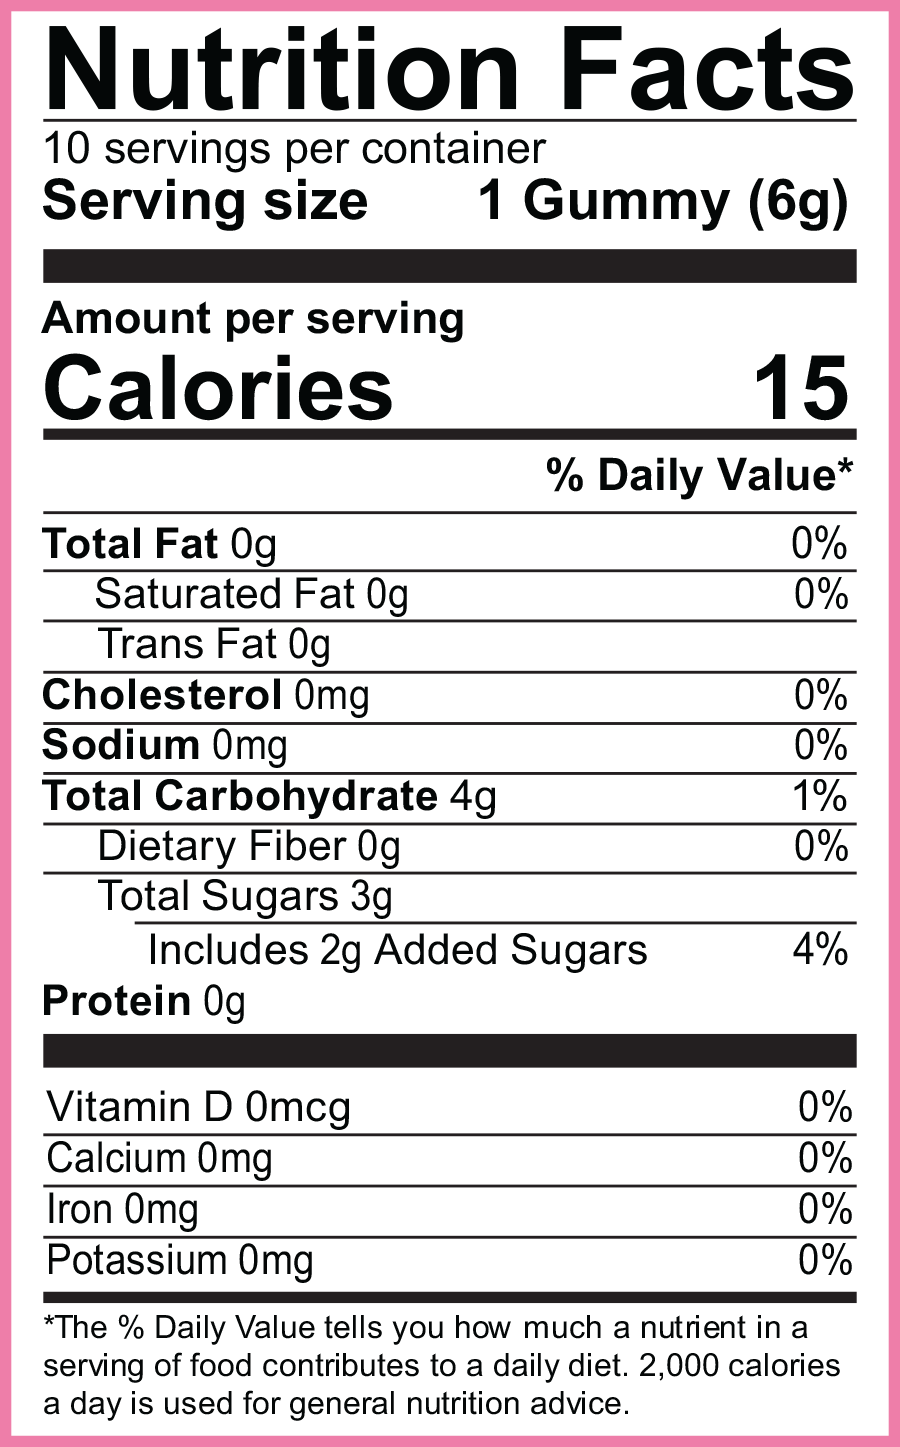 The Fruits nutrition label